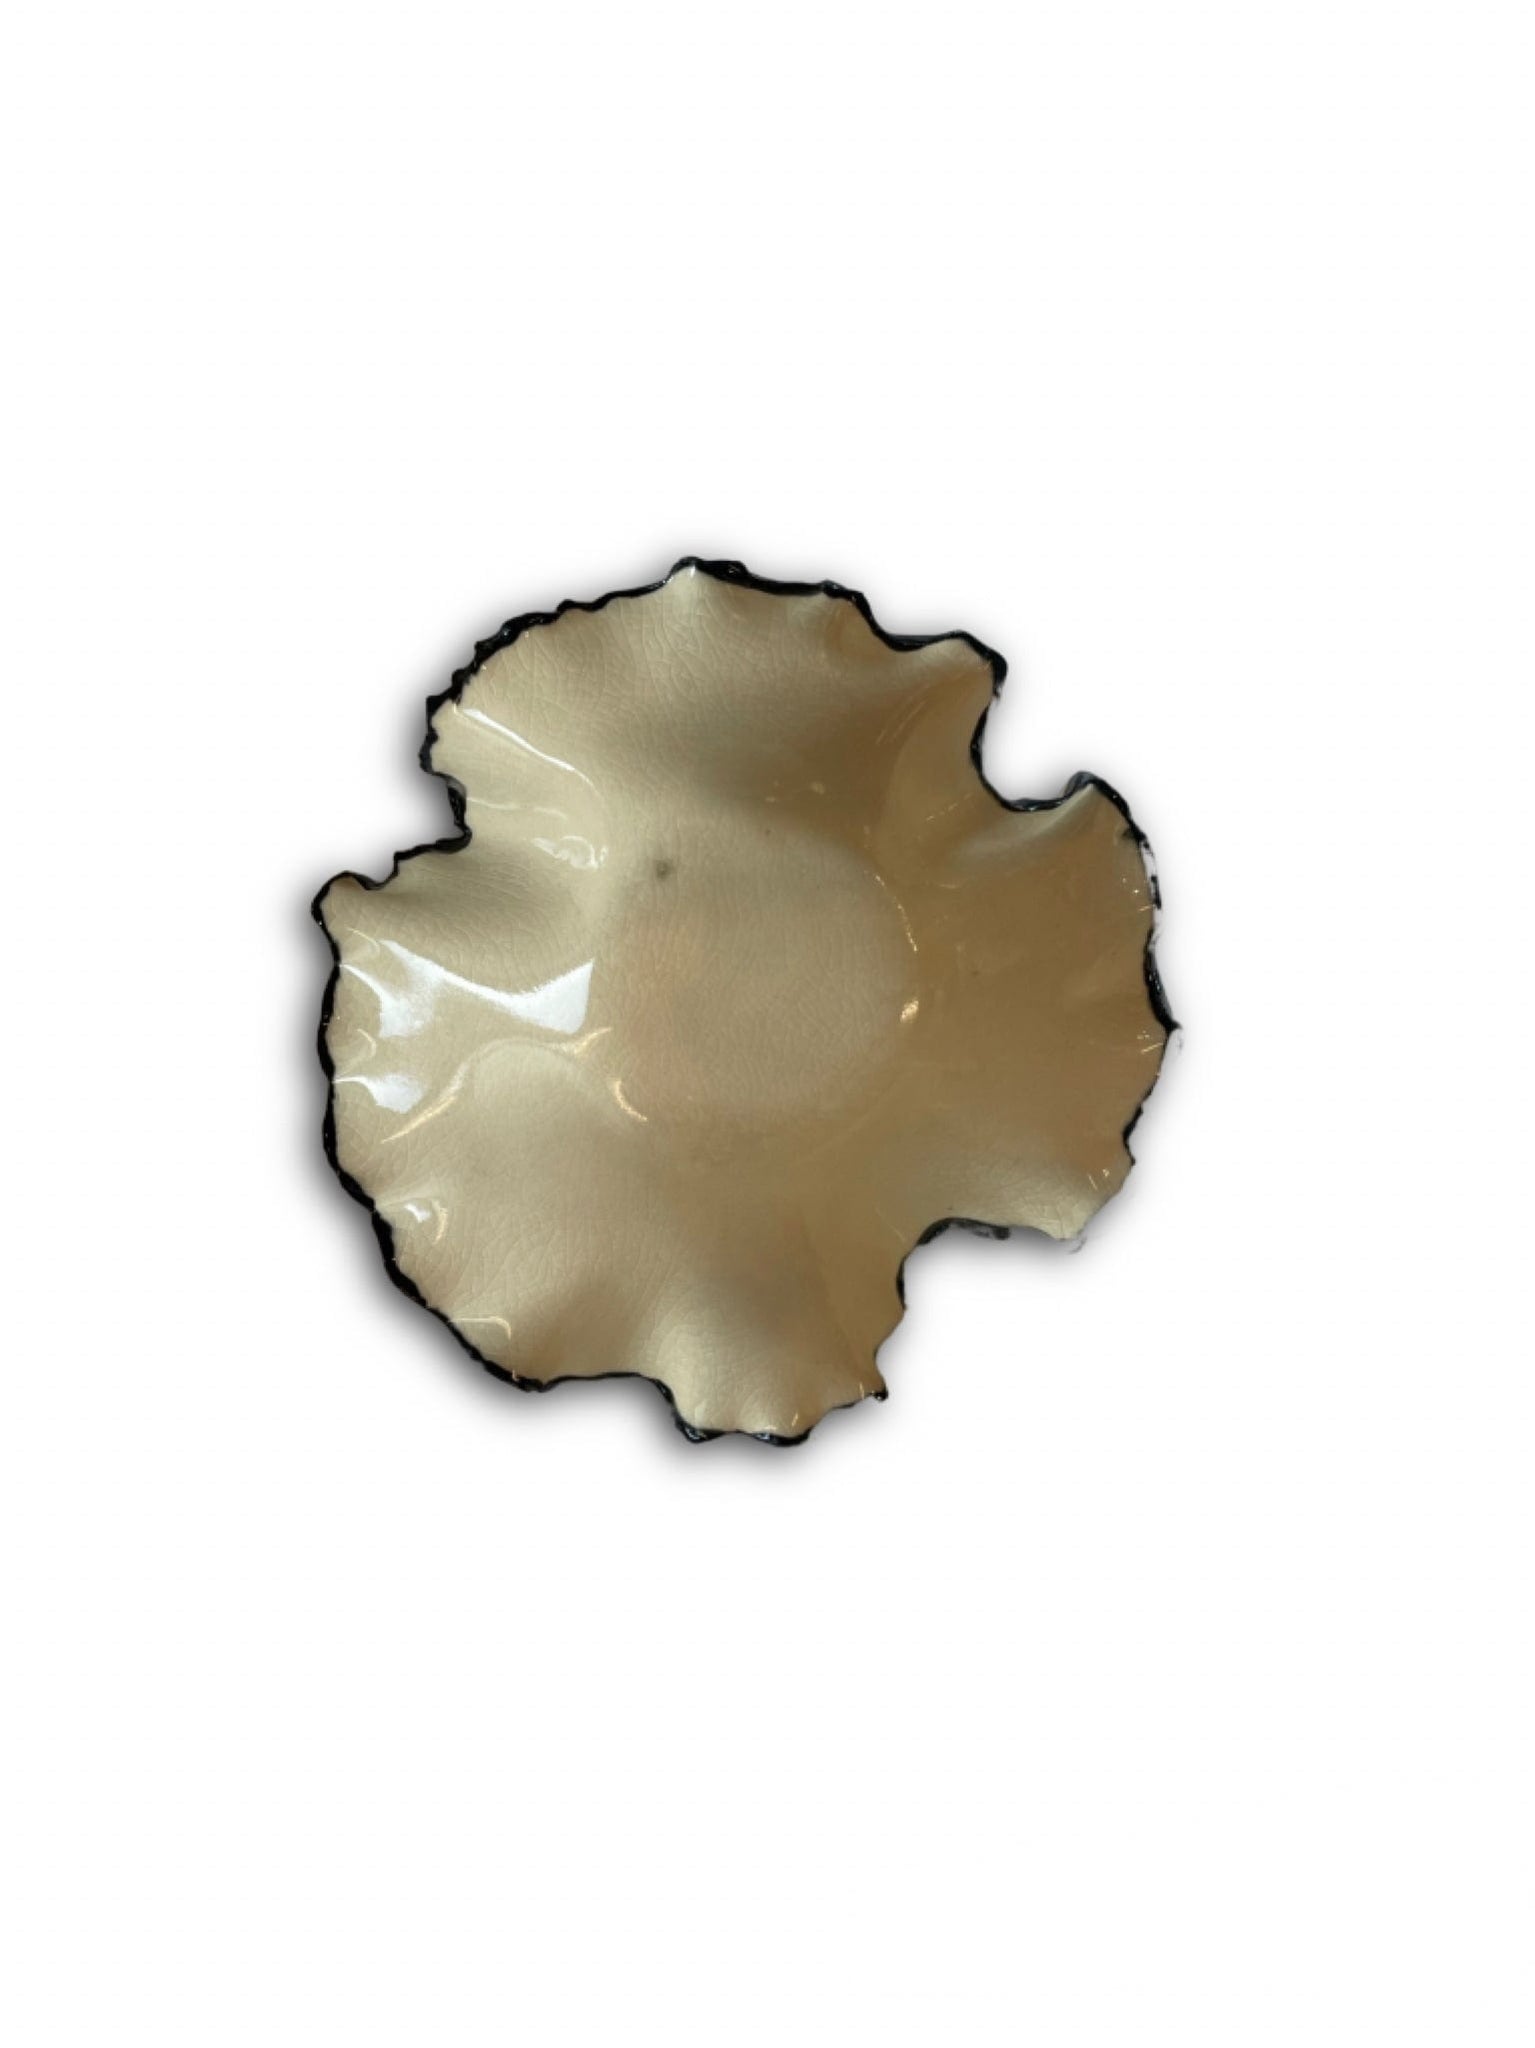 Nathalee Paolinelli Nathalee Paolinelli - Torn Ruffle Bowl in Cream with Black Rim La Bomba Floristry Vancouver Canada